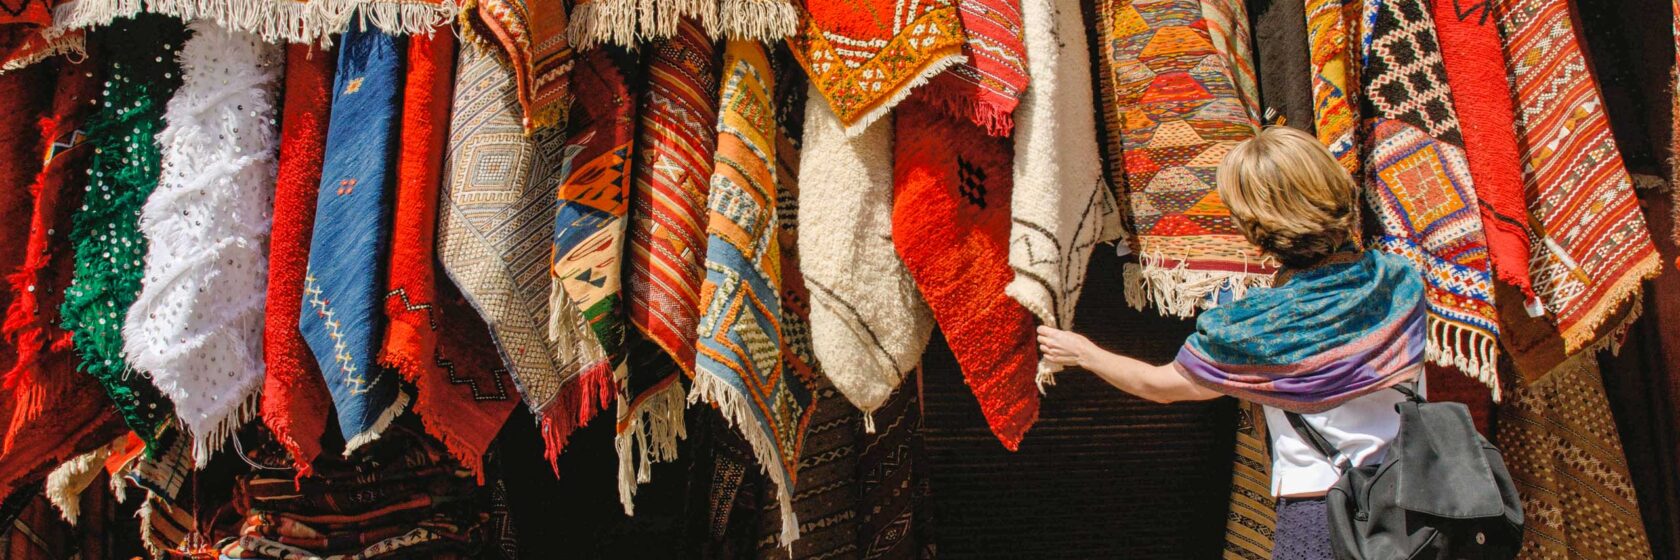 A woman shopping for rugs in Marrakech.